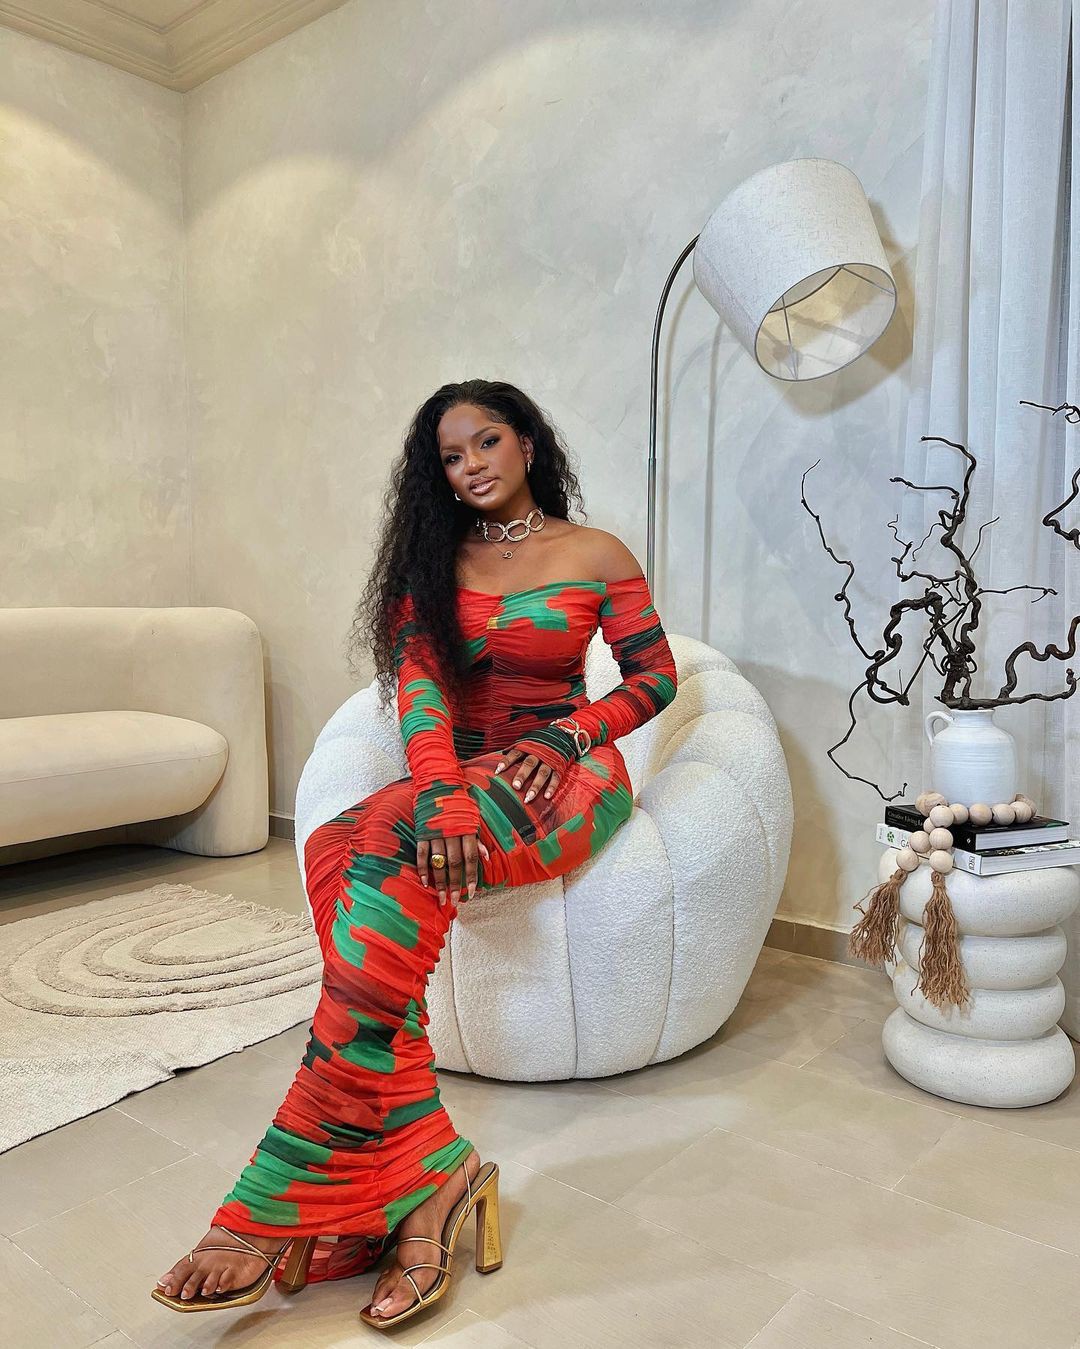 Lagos-Lately: Fashion Views of Nigerian Celebrities and Influencers